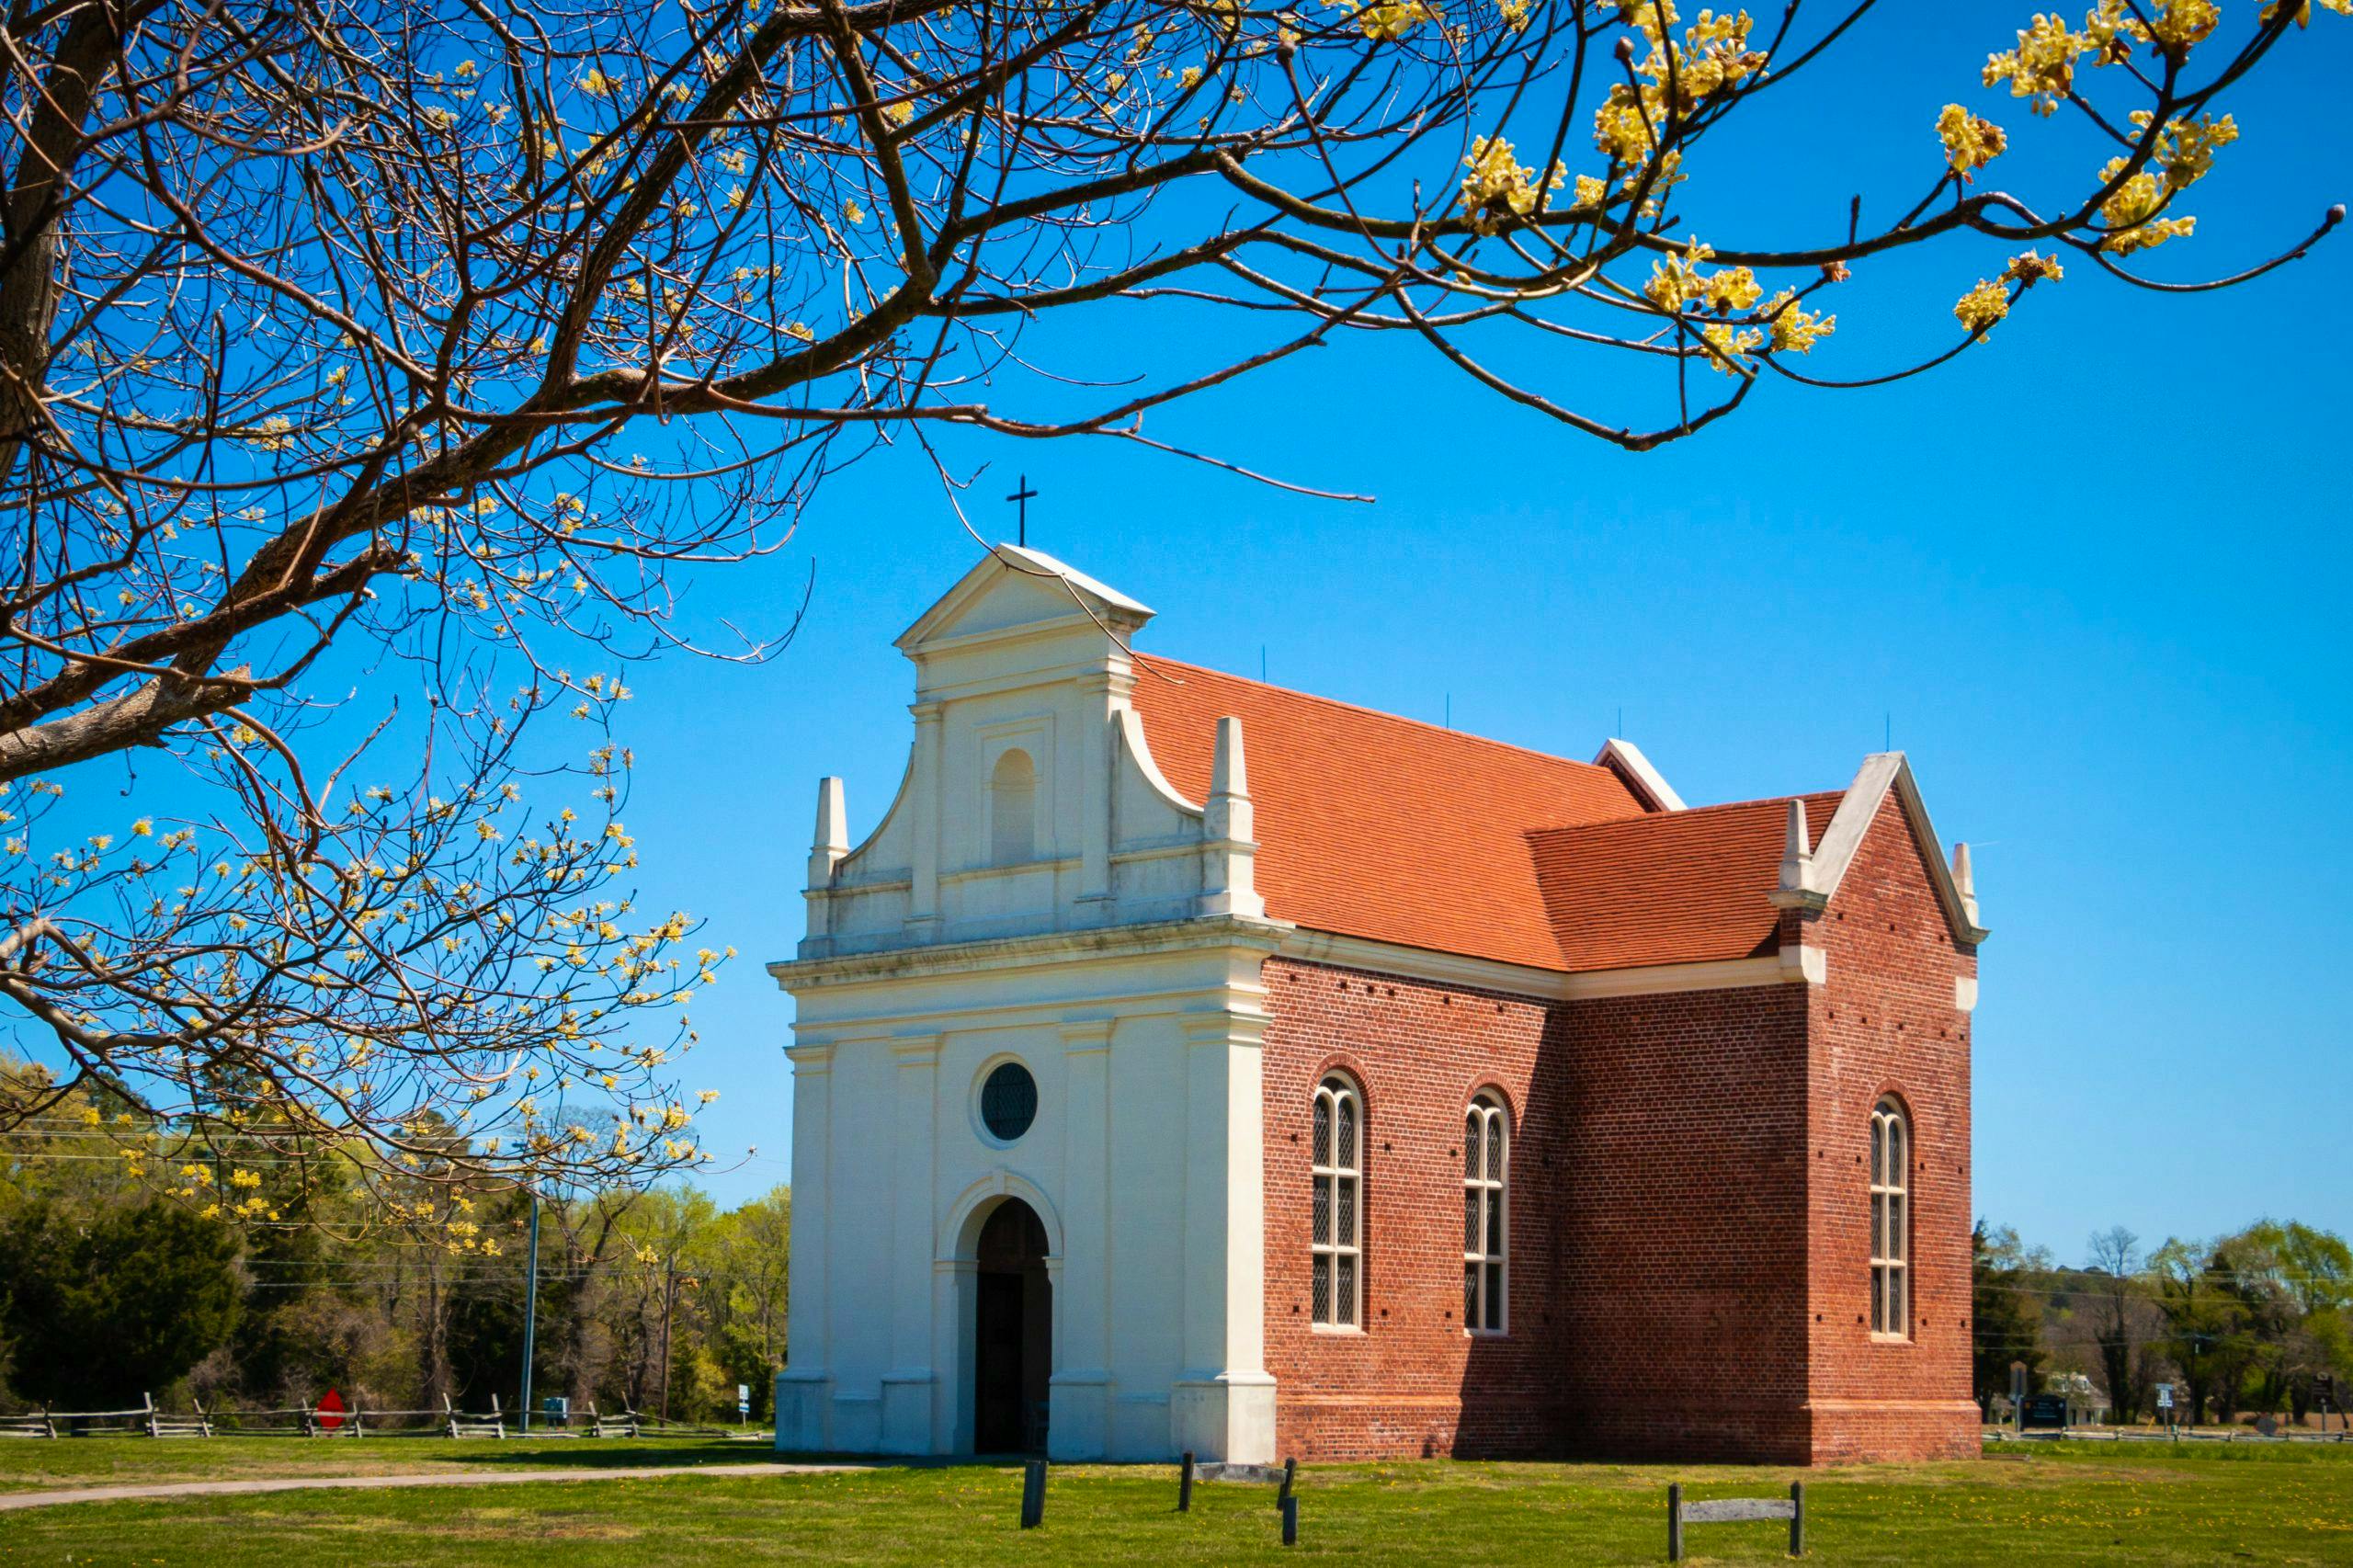 Brick Chapel (ca. 1667) stands as a symbol of religious tolerance in early Maryland.